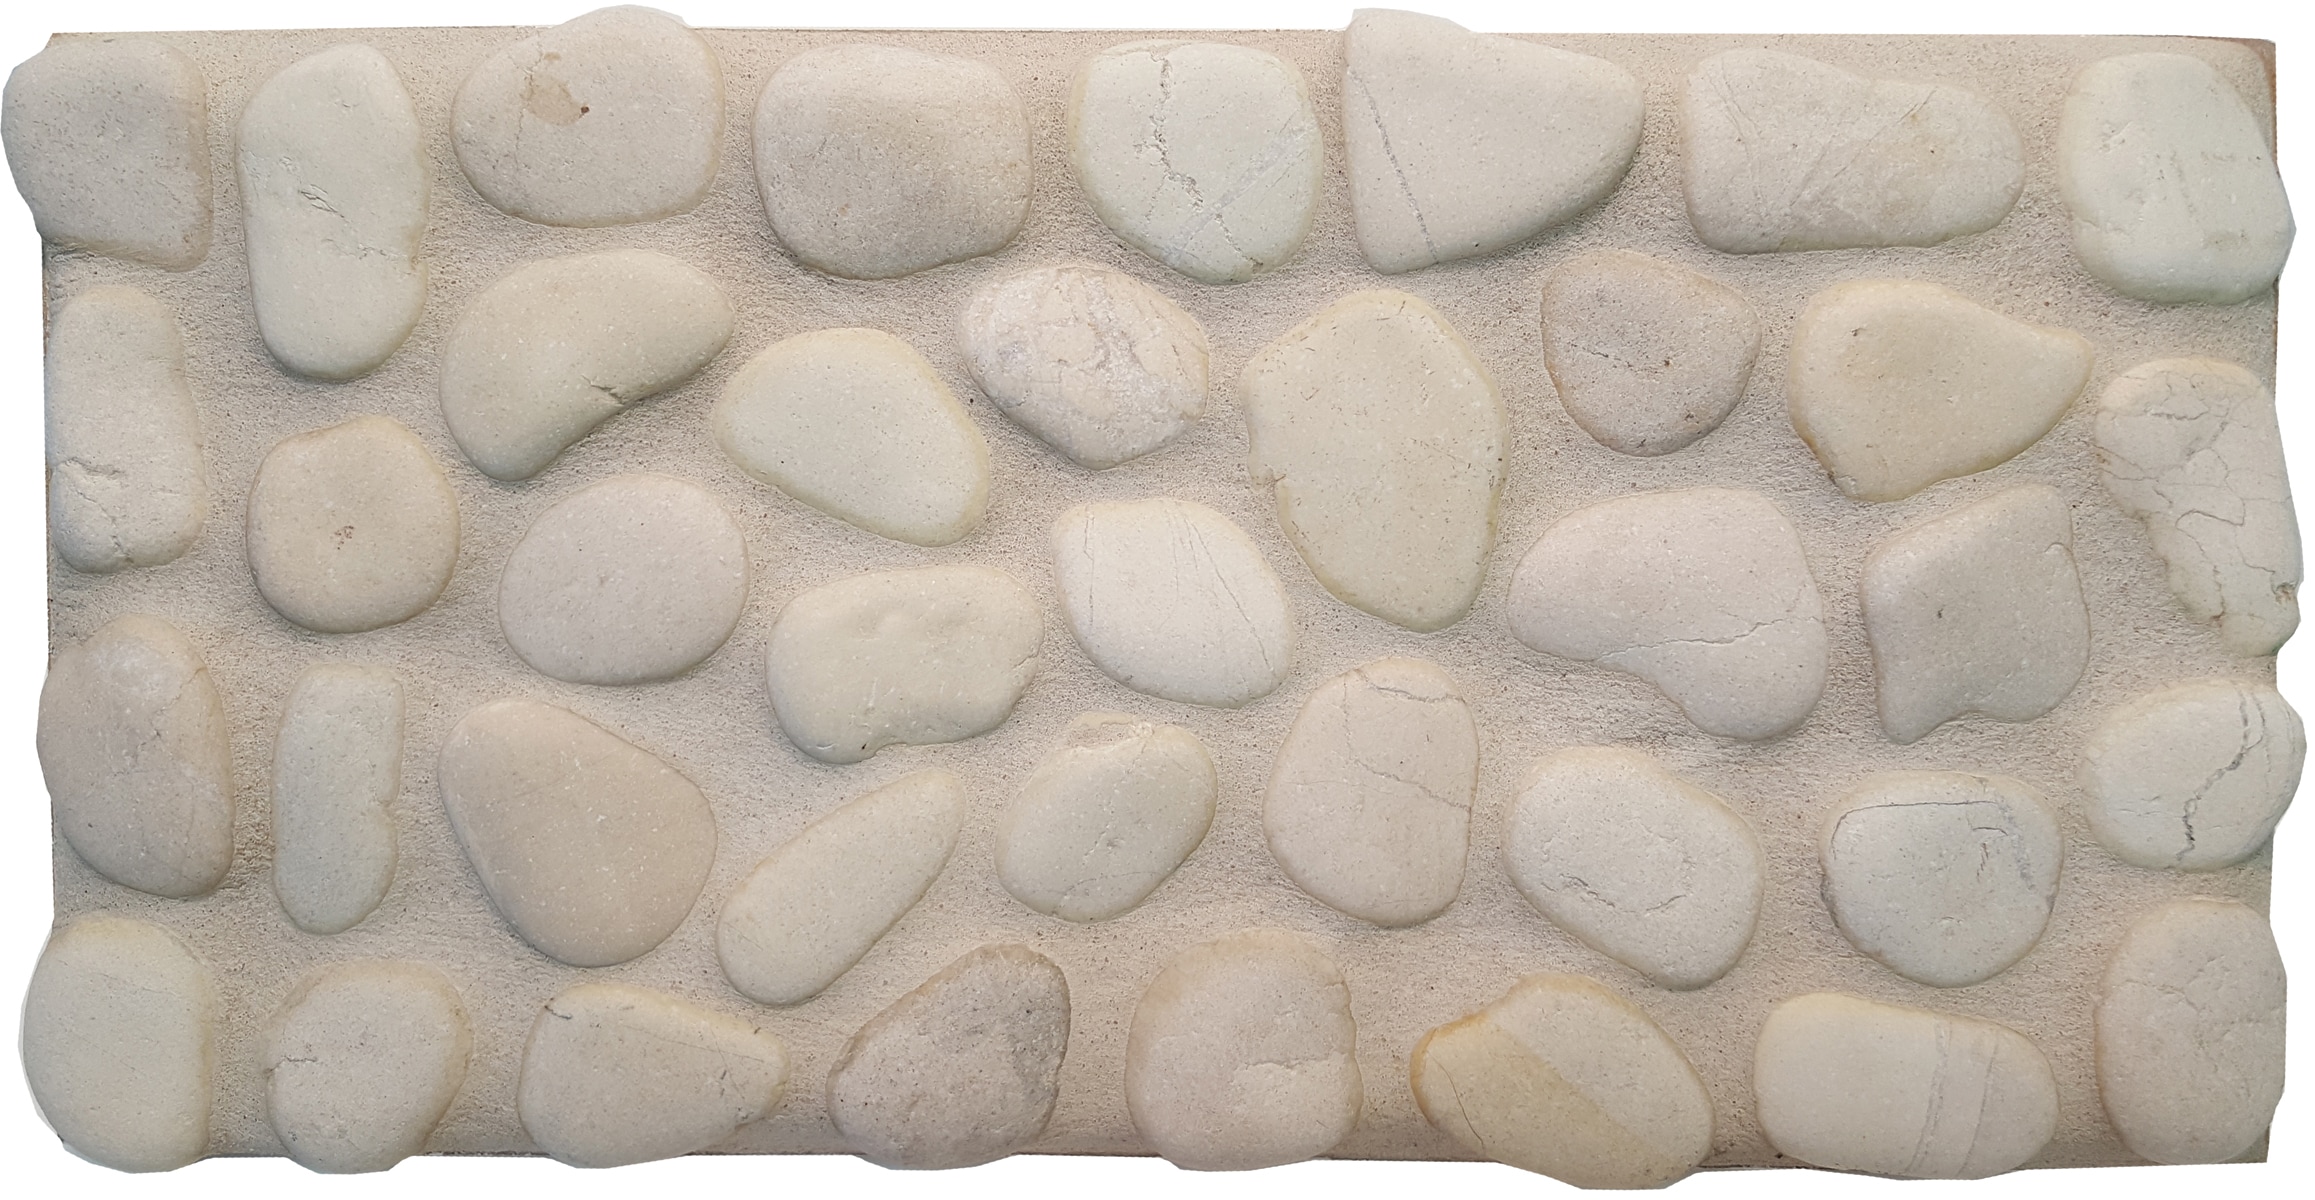 Solistone River Rock Pebbles 10 Pack Brookstone 12 In X 12 In Natural